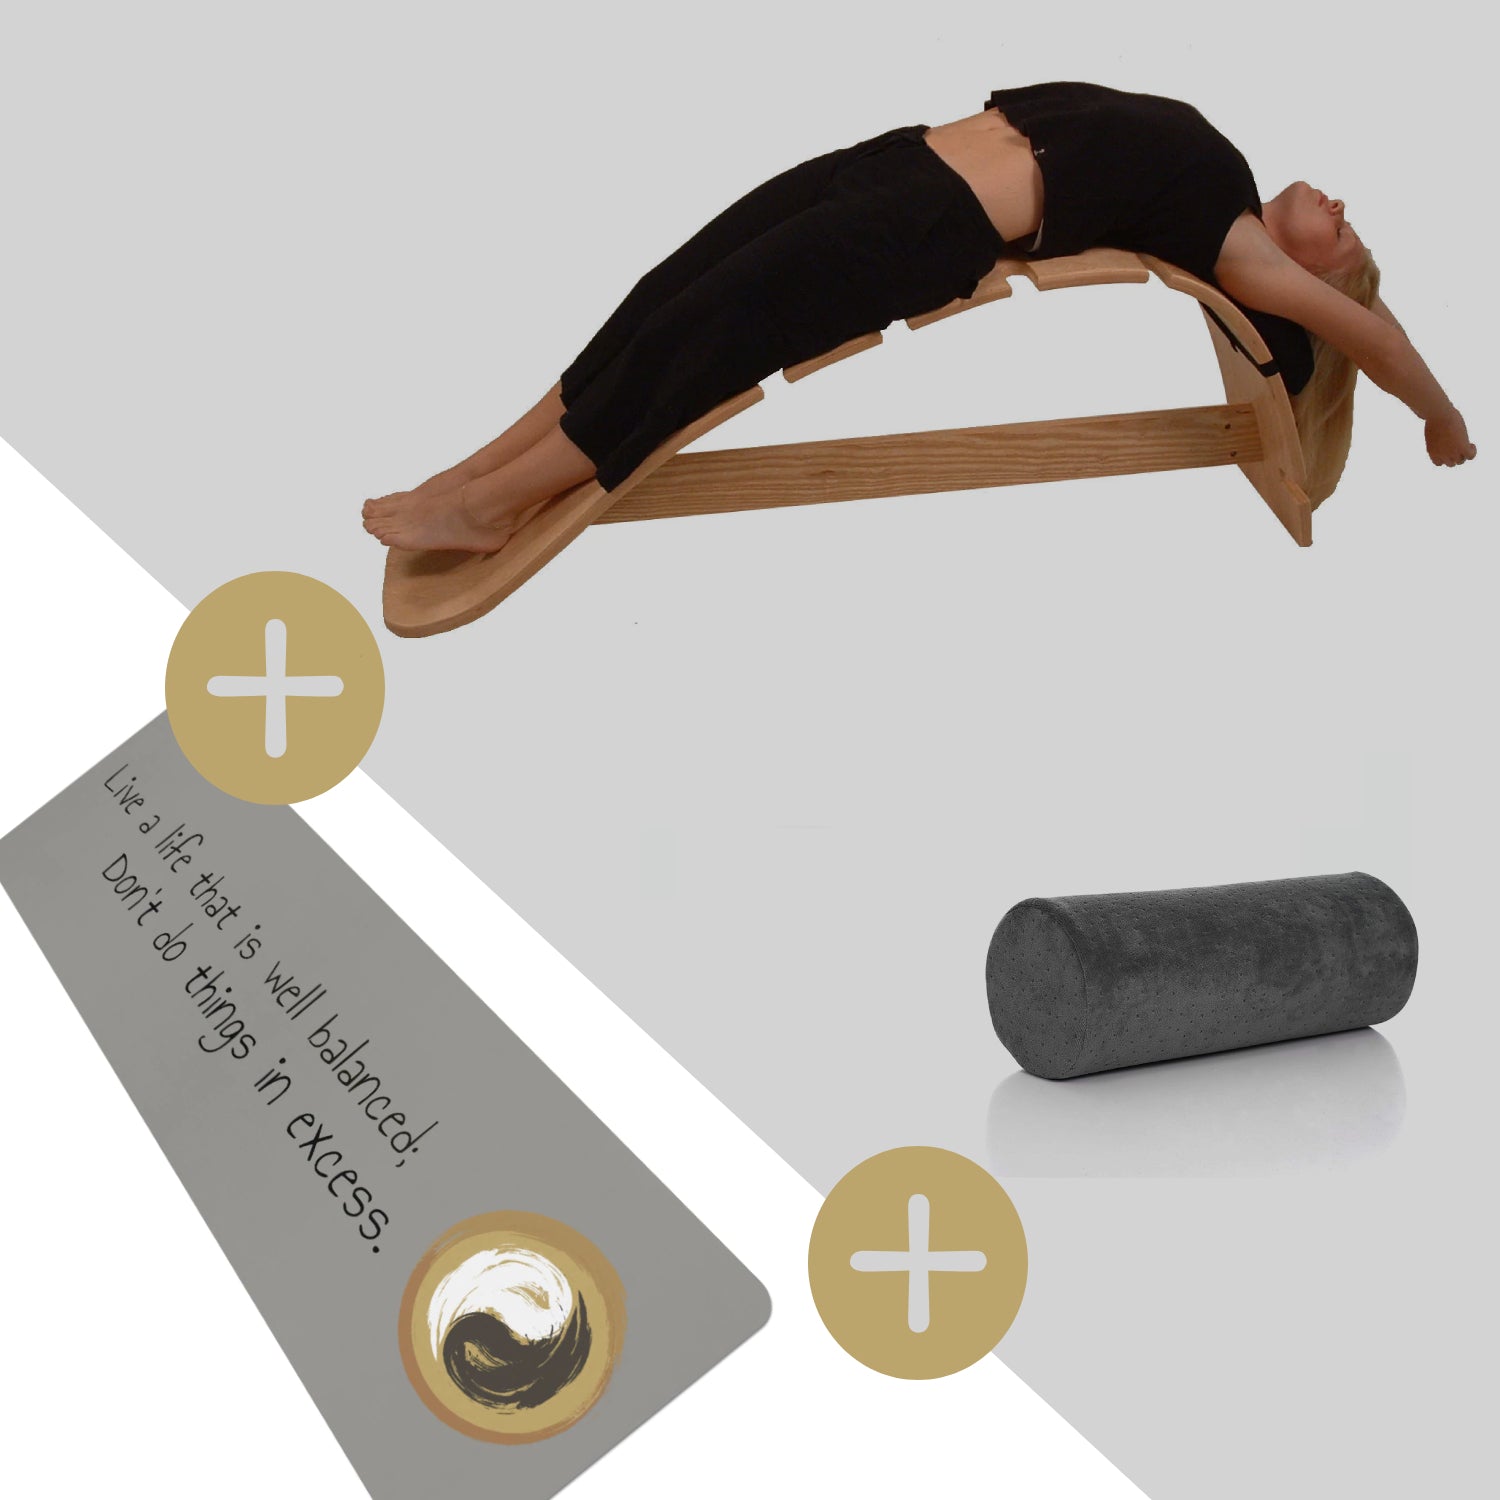 Yoga and Pilates 101 -The Whale Therapeutic with Yoga Mat and Yoga Bolster - 3 Items Bundle - Personal Hour for Yoga and Meditations 